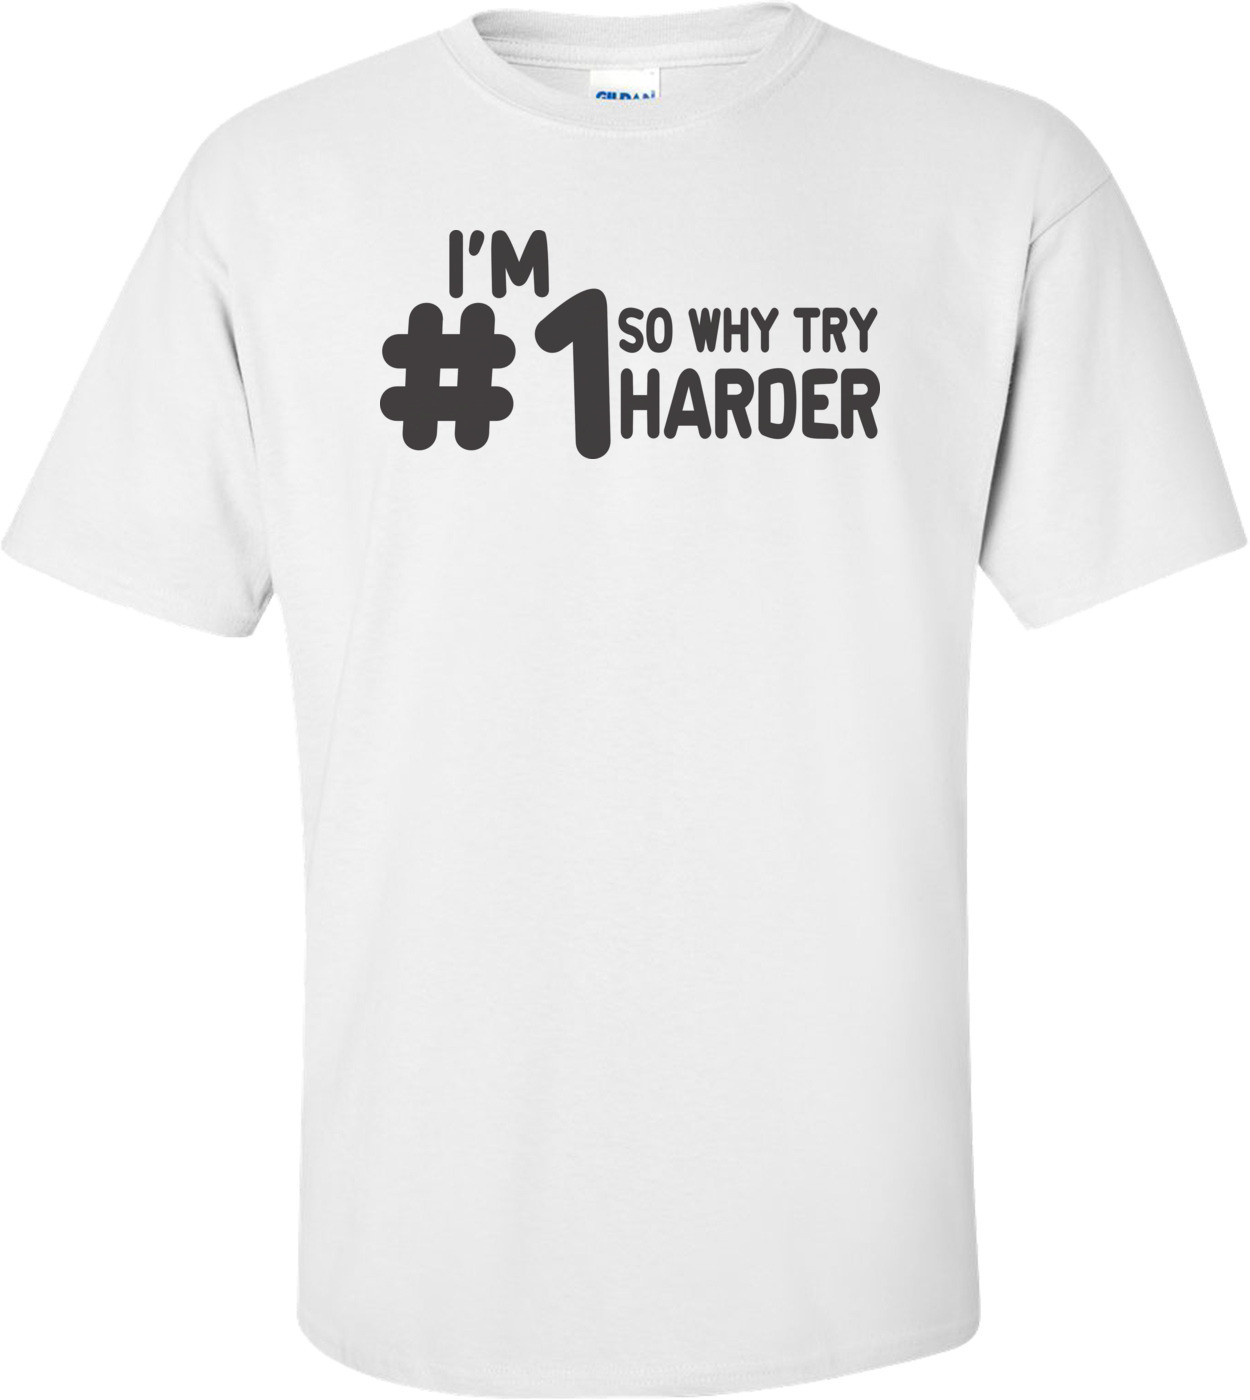 I'm #1 So Why Try Harder T-shirt